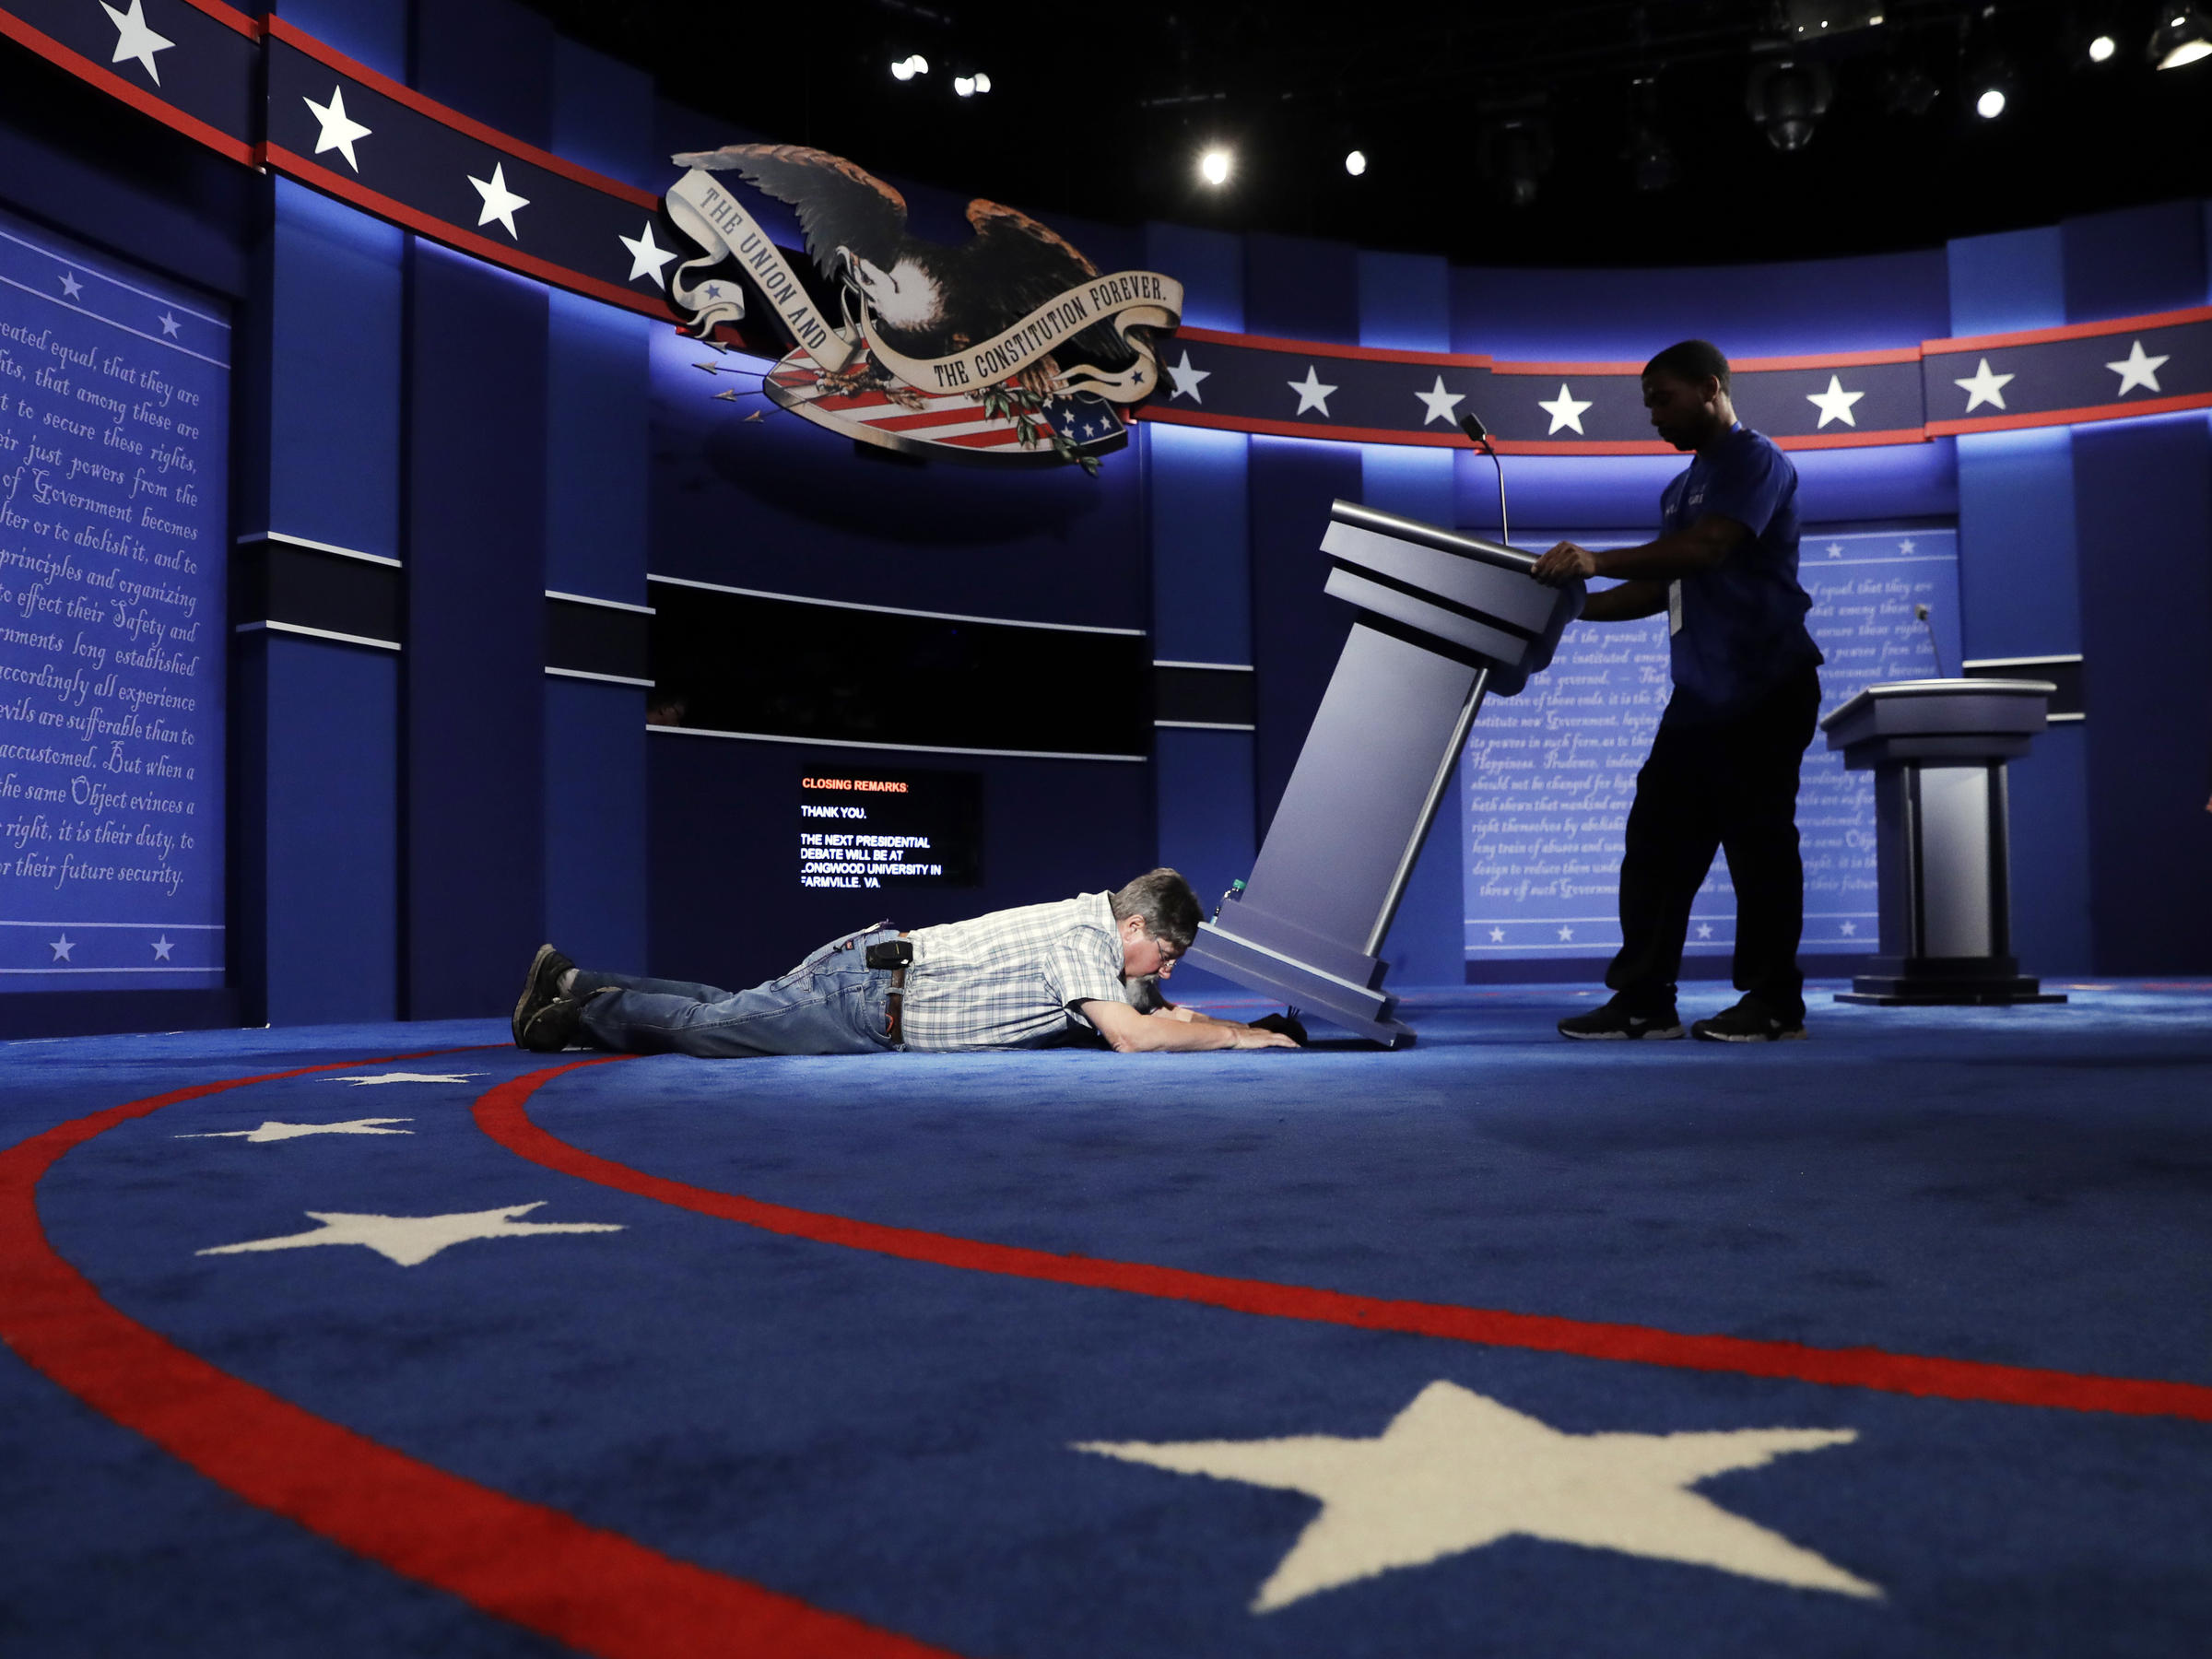 Technicians set up the stage for the Sept. 26 presidential debate between Democratic presidential candidate Hillary Clinton and Republican presidential candidate Donald Trump at Hofstra University in Hempstead, N.Y.